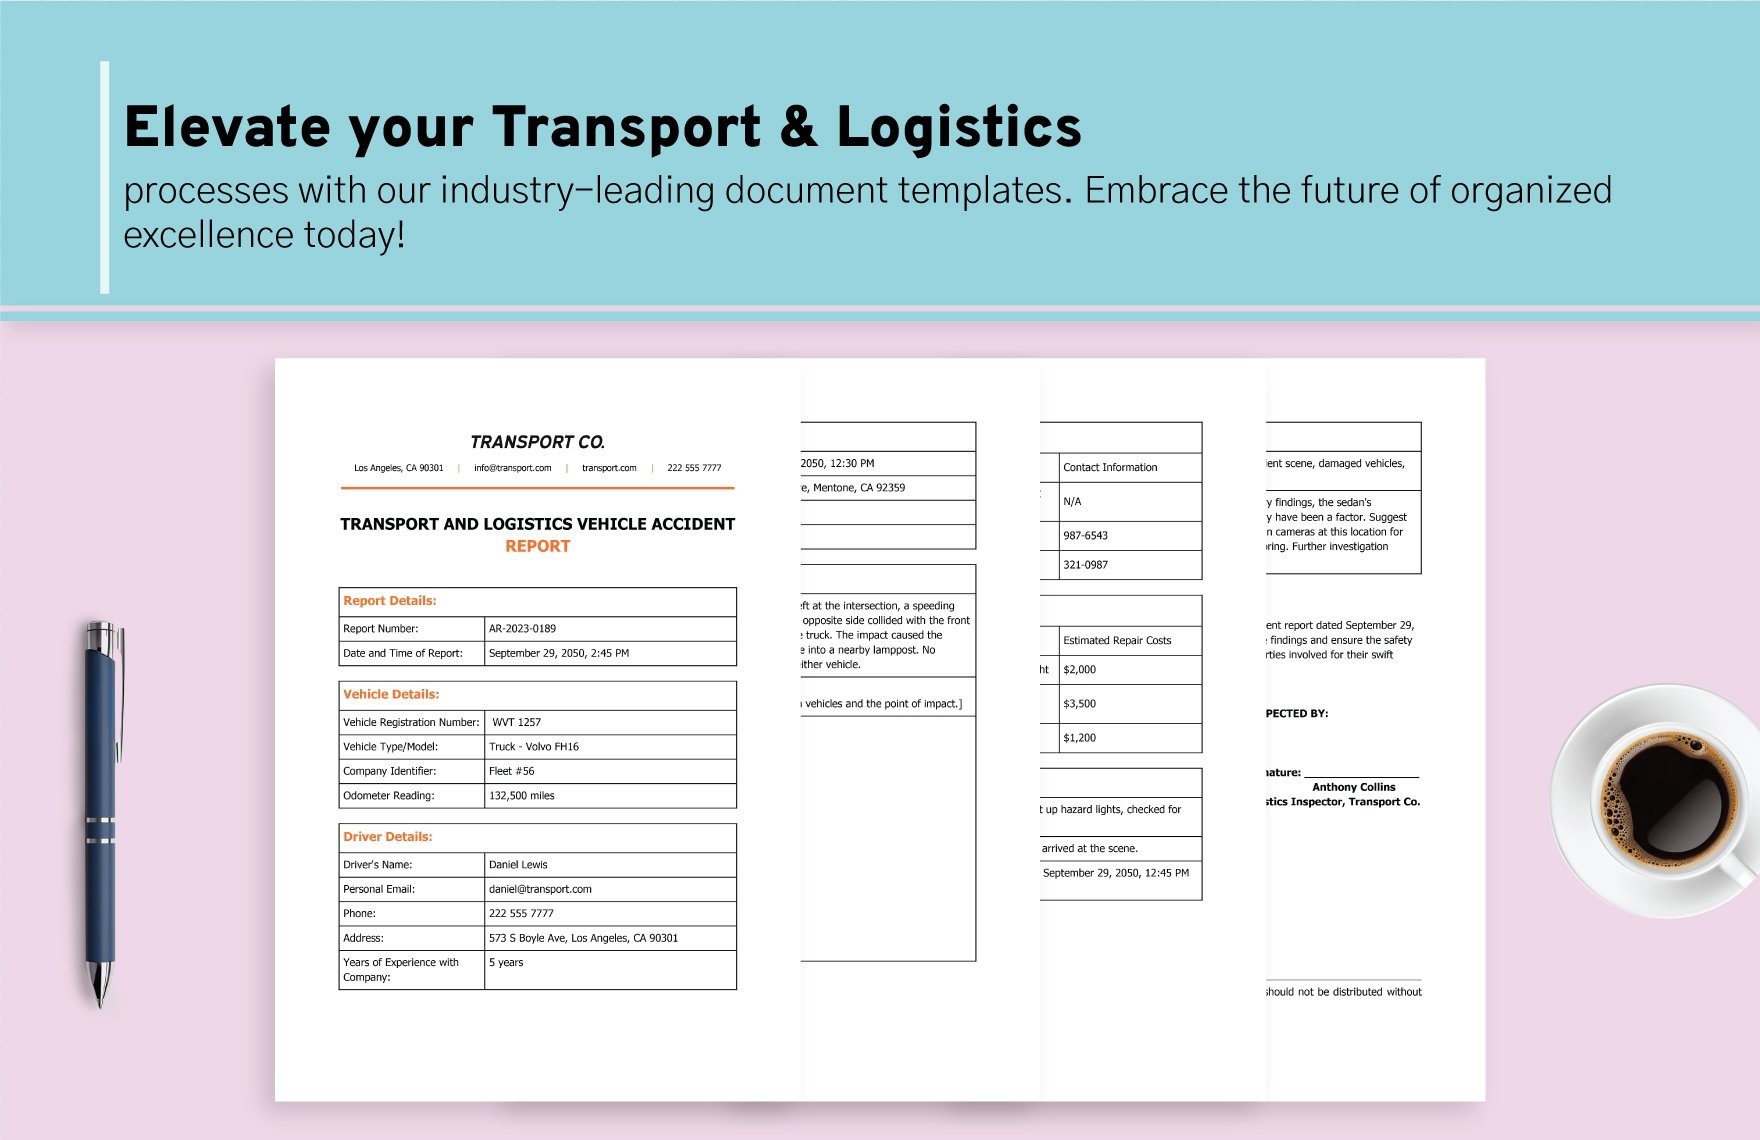 Transport and Logistics Vehicle Accident Report Template